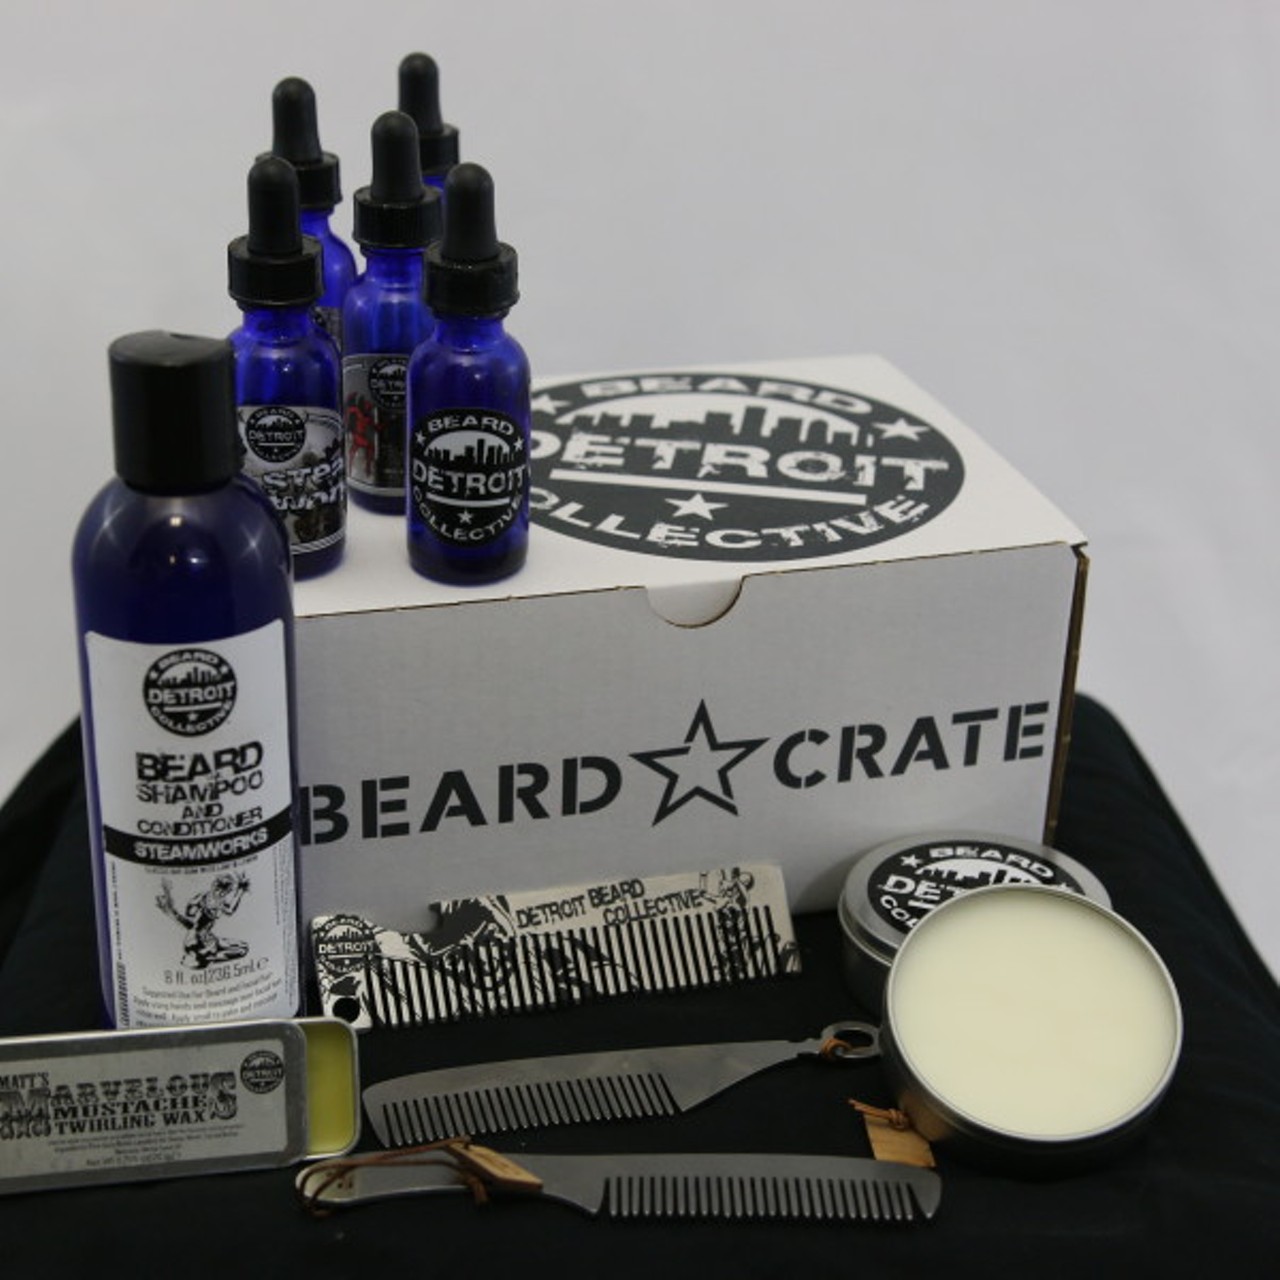 The Beard Crate -- Keep that beard in check with mix and match products from Detroit Beard Collective. $28.99 (Detroit Beard Collective)